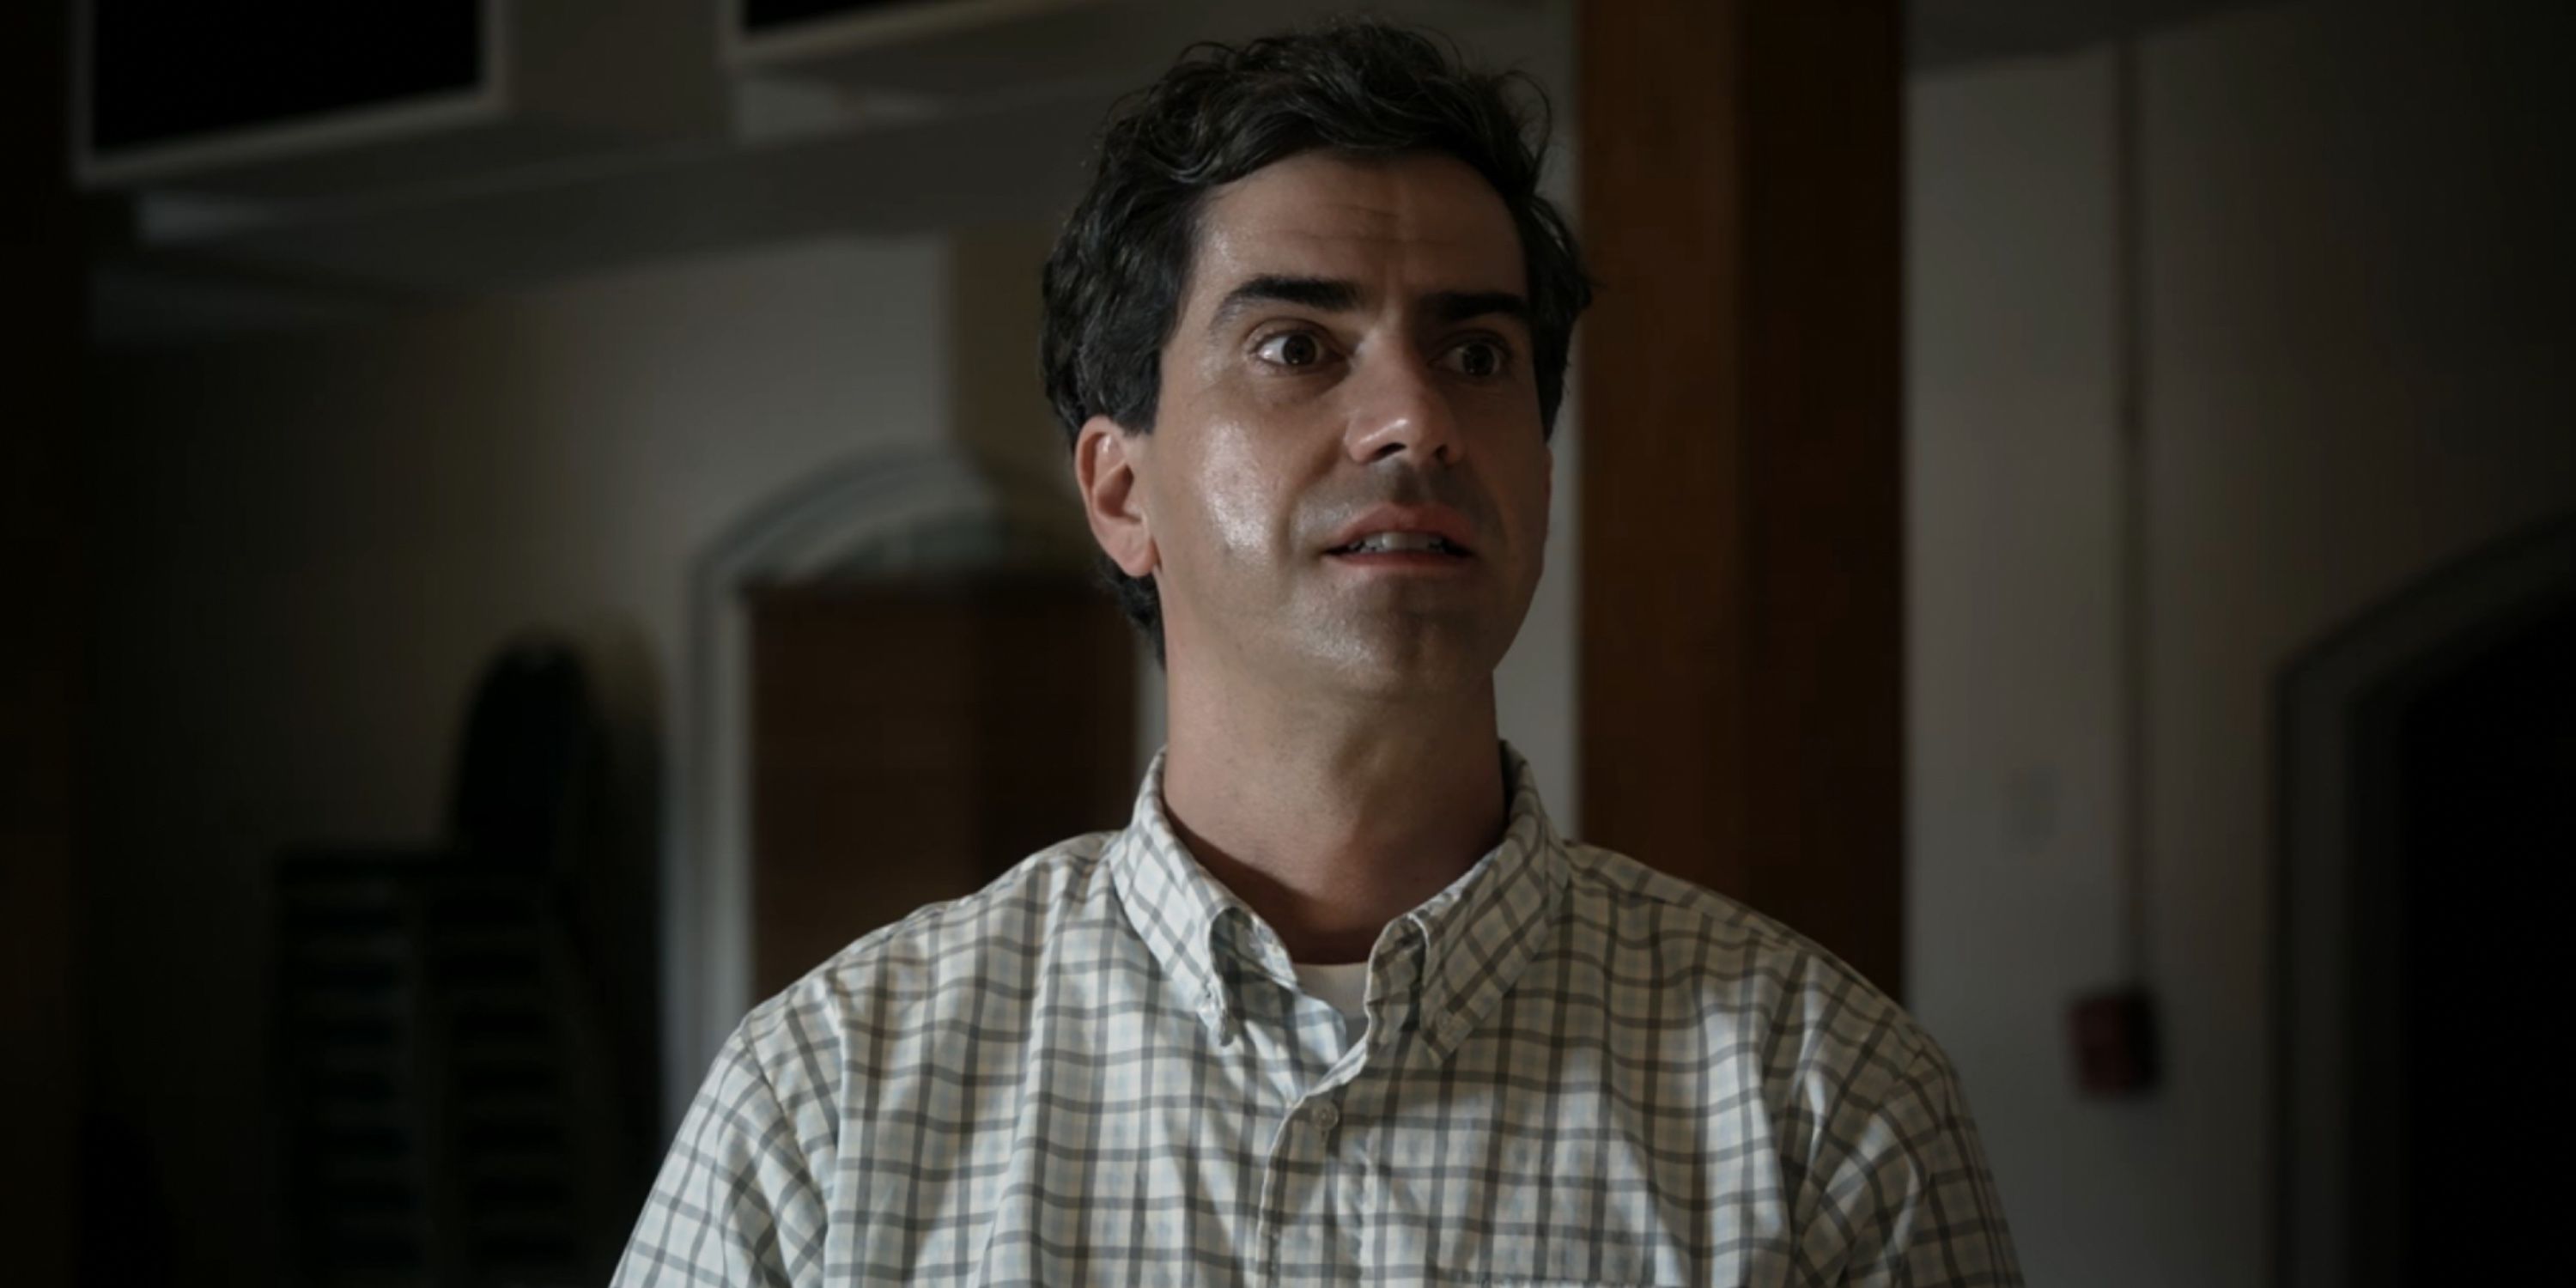 Hamish Linklater in Tell Me Your Secrets on Amazon Prime